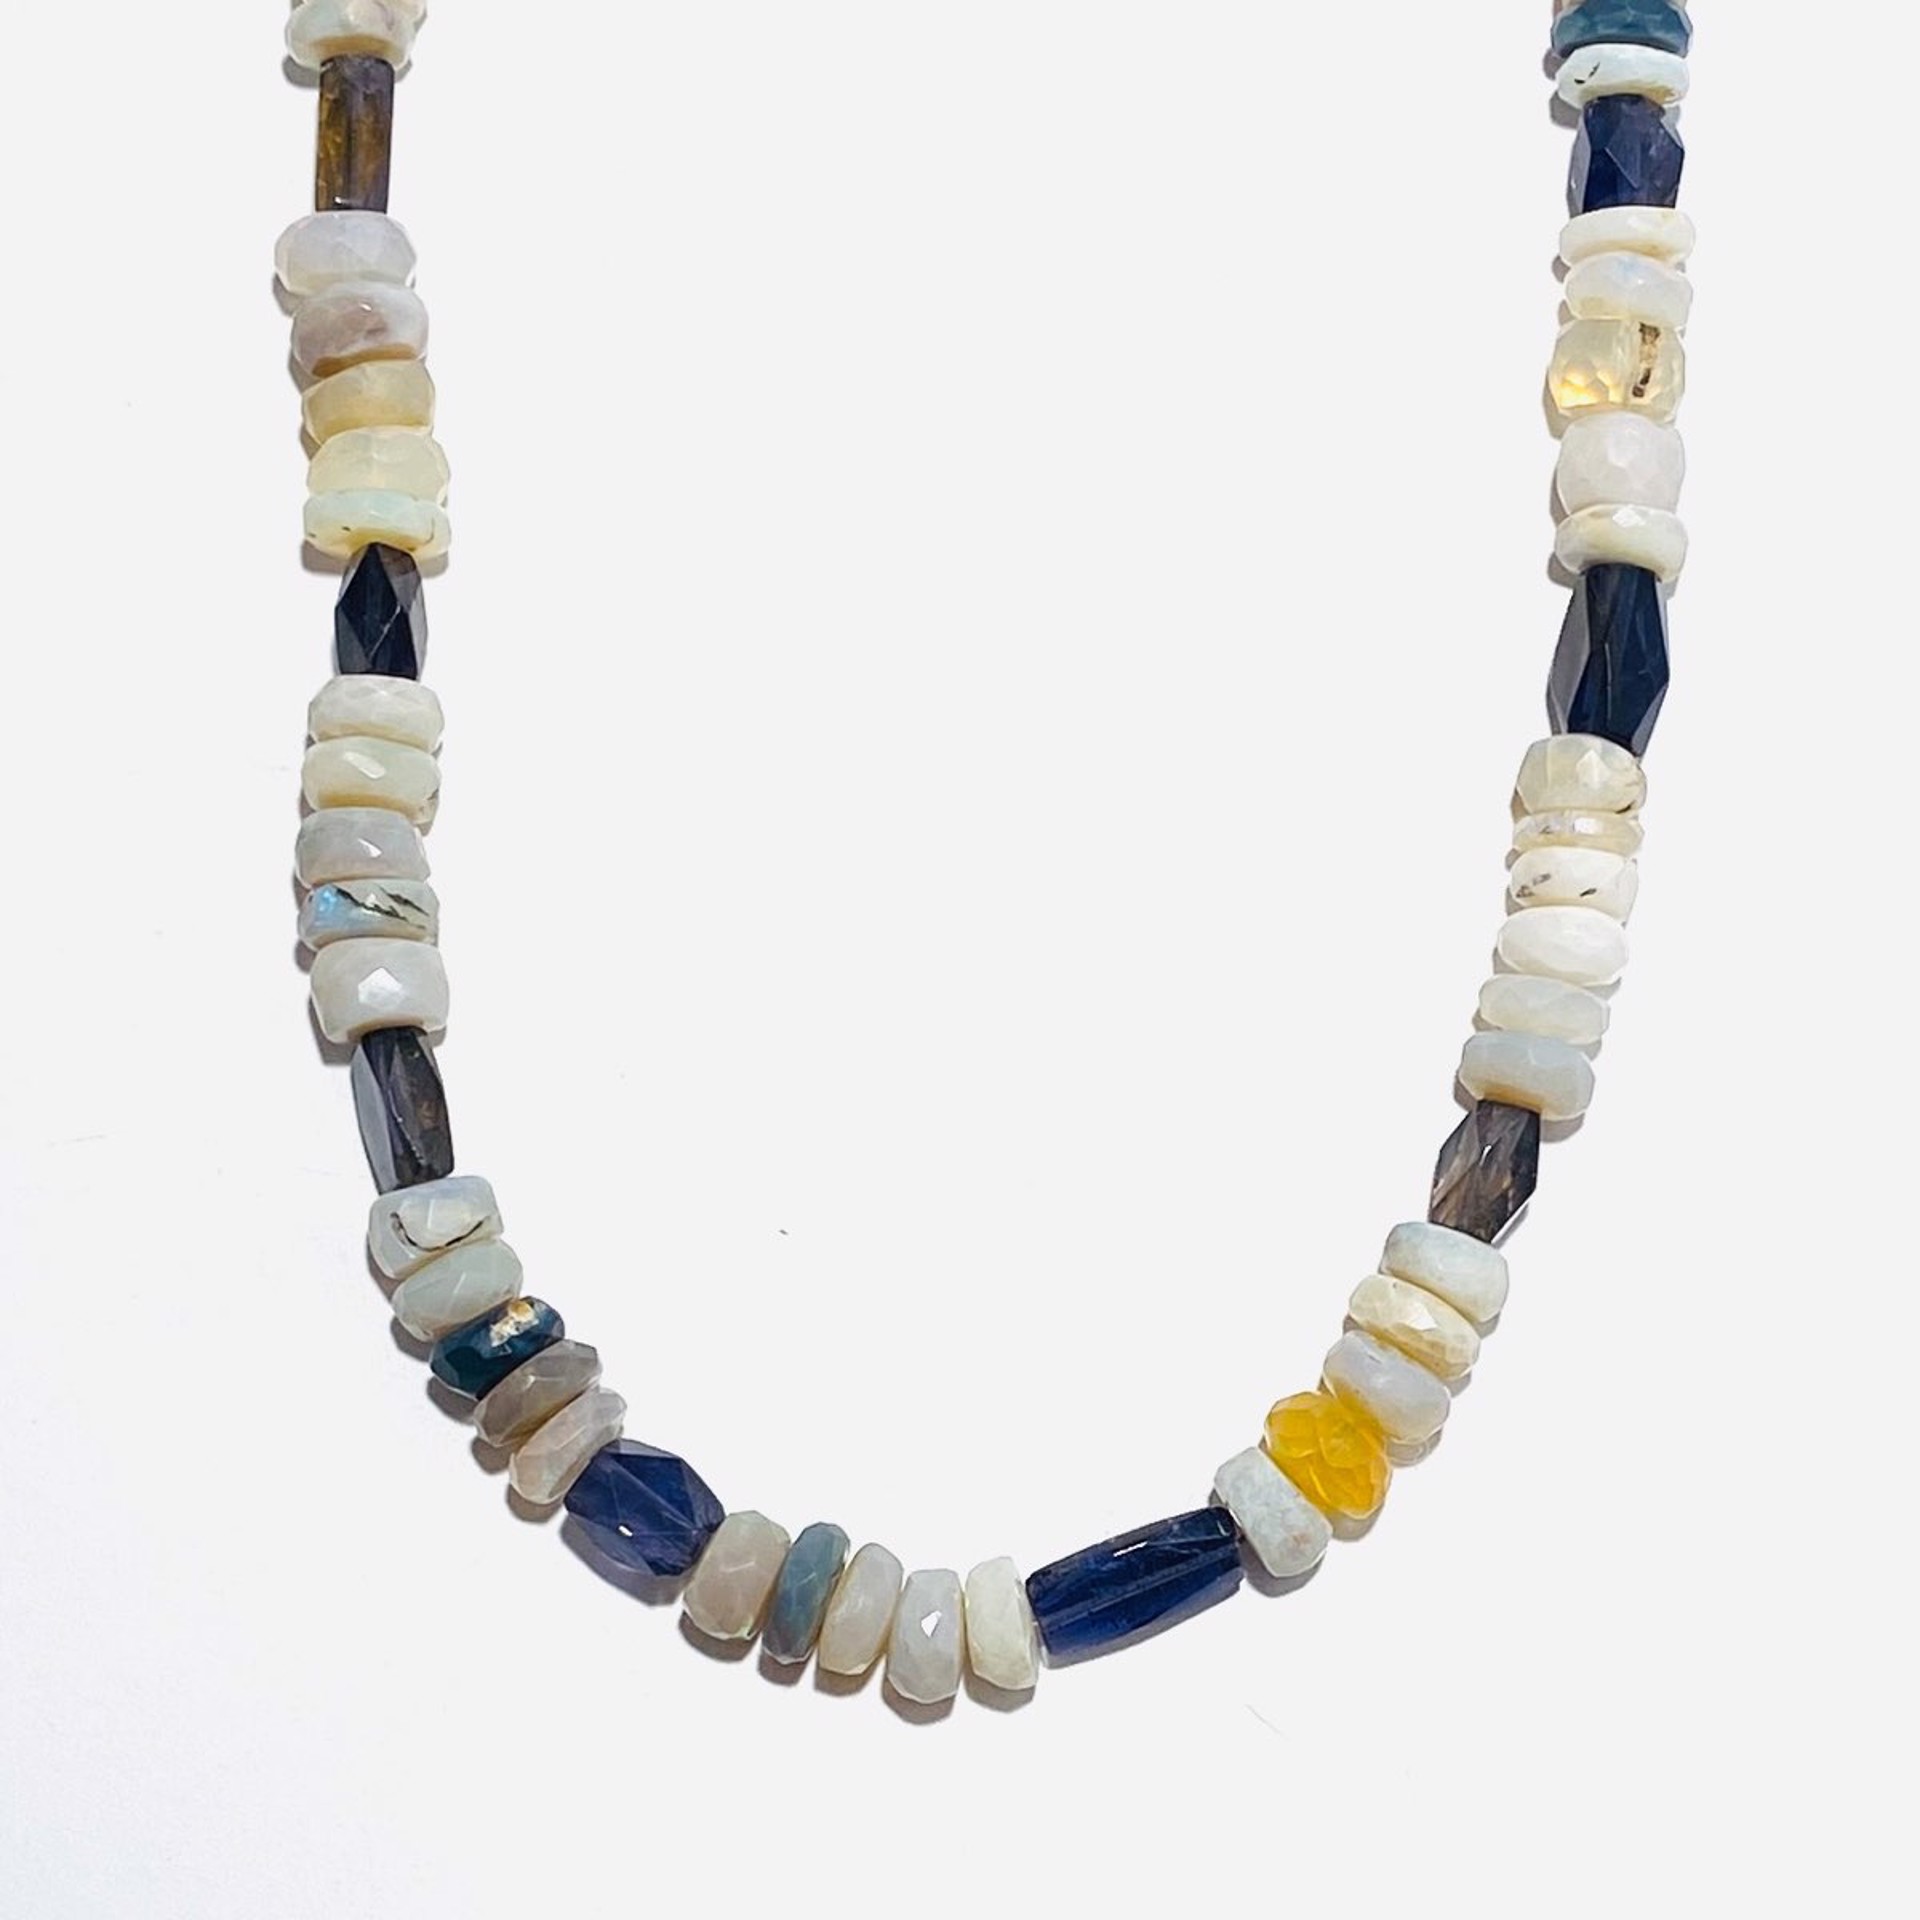 Opal and Iolite Strand Necklace NT23-64 by Nance Trueworthy